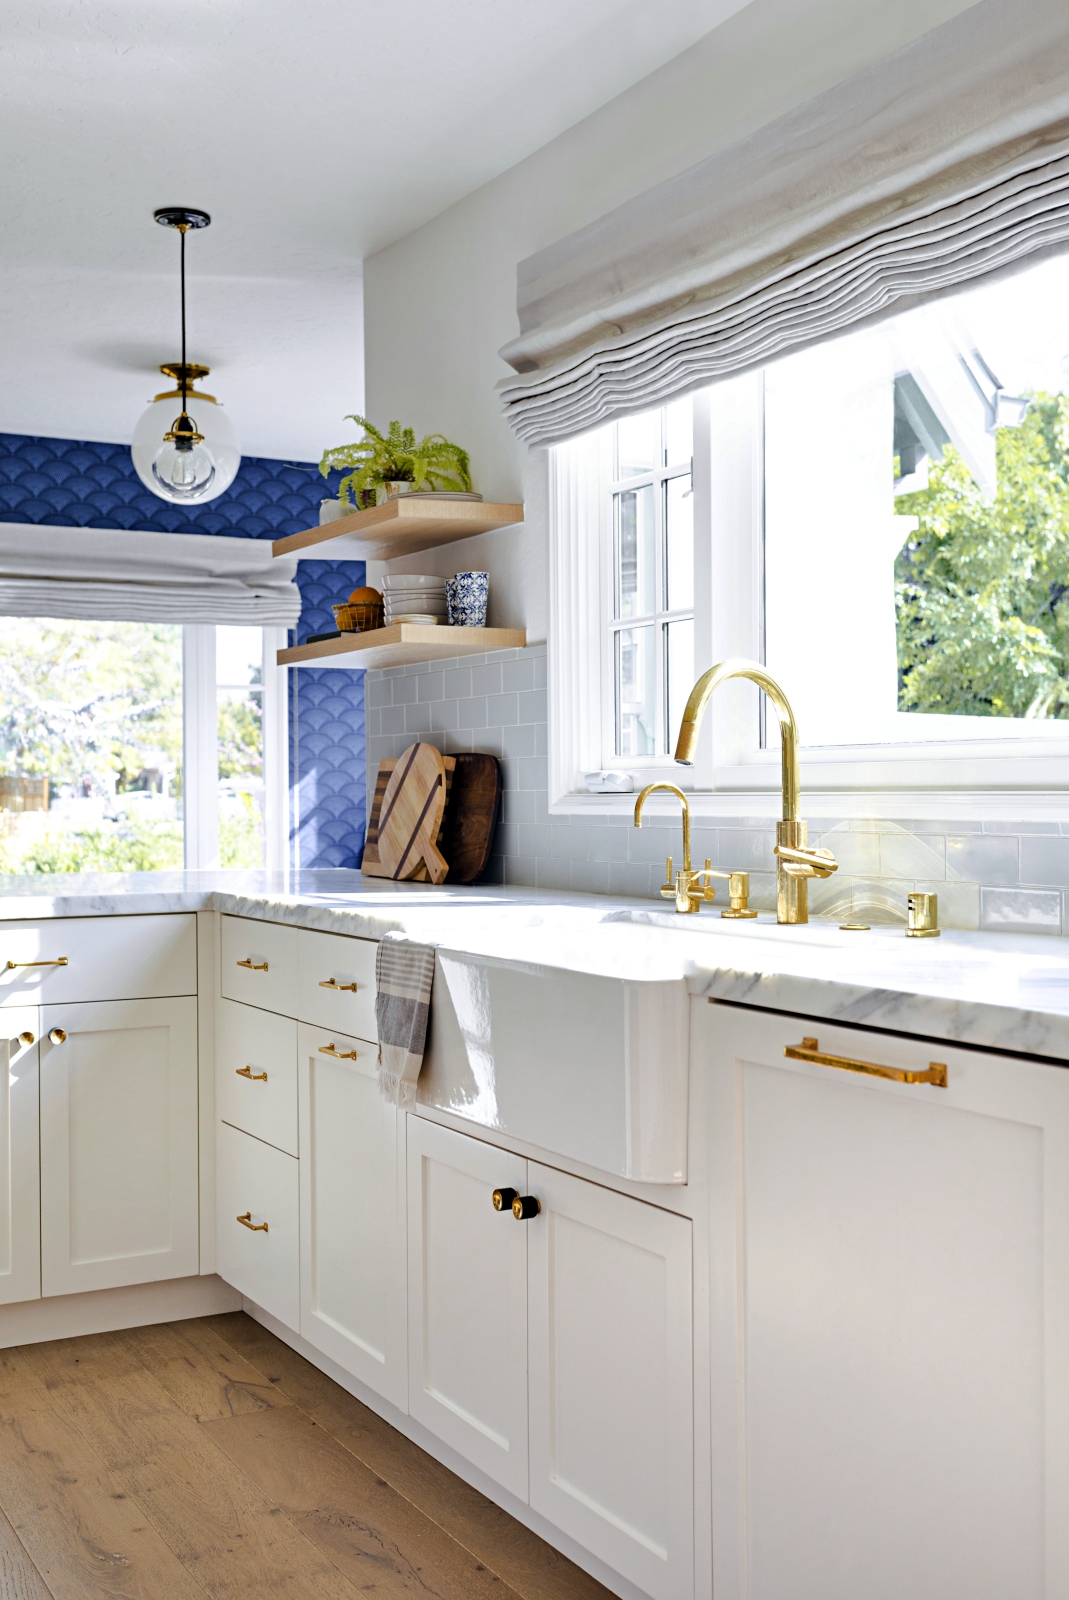 Stunning White Beach Style Kitchen with Patterned Blue Wallpaper